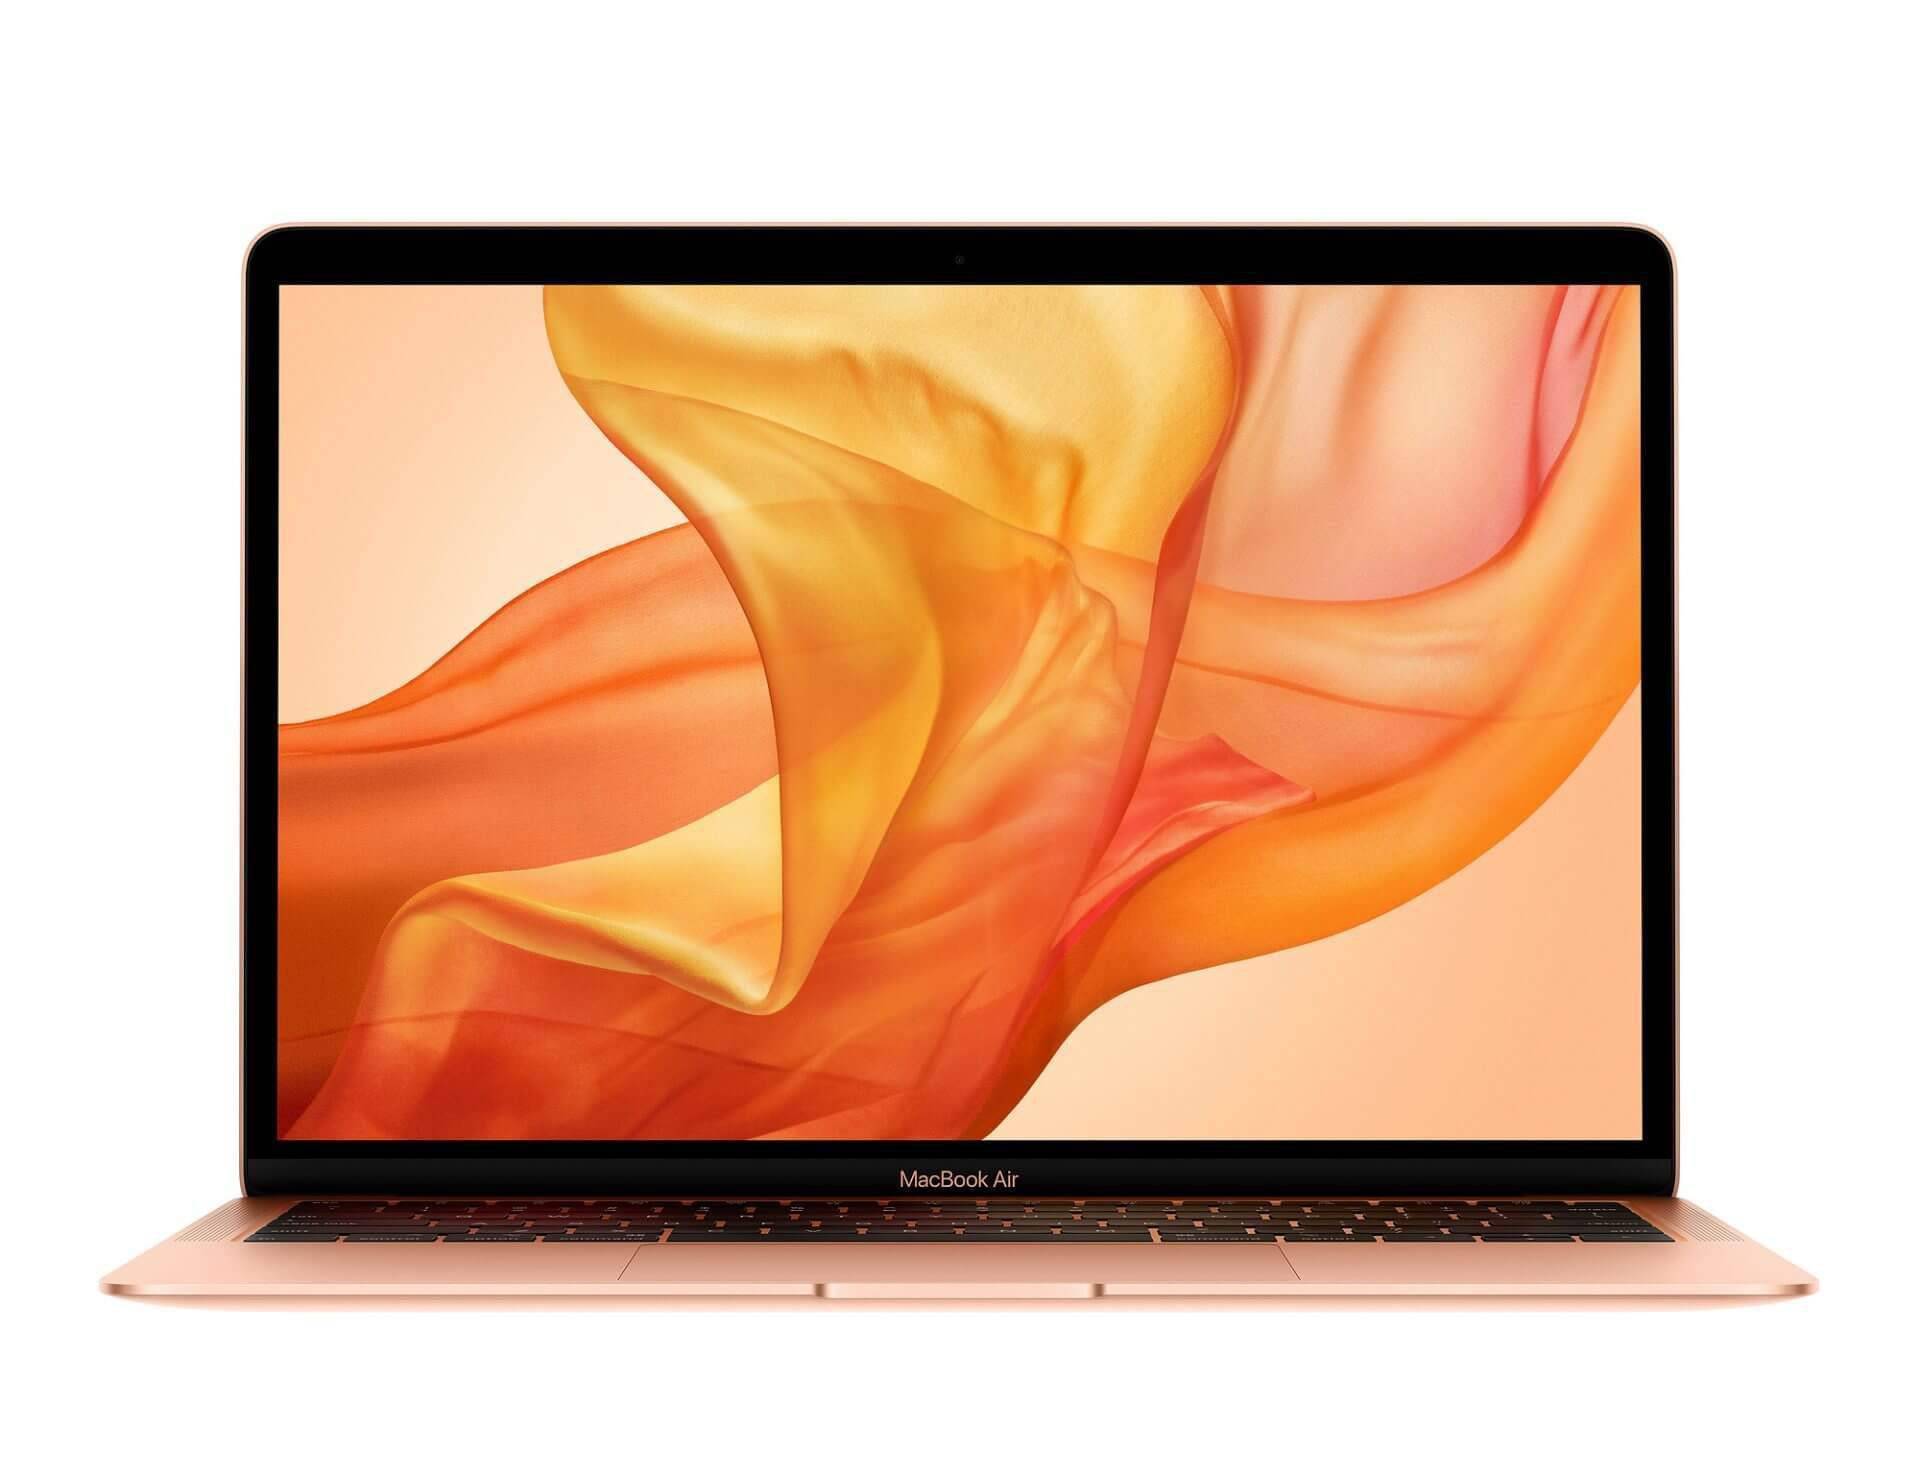 CJsGo | Apple's MacBook Air (2019) is a great laptop and choice if you don’t need the extra graphics performance and would like to save a couple of hundred bucks